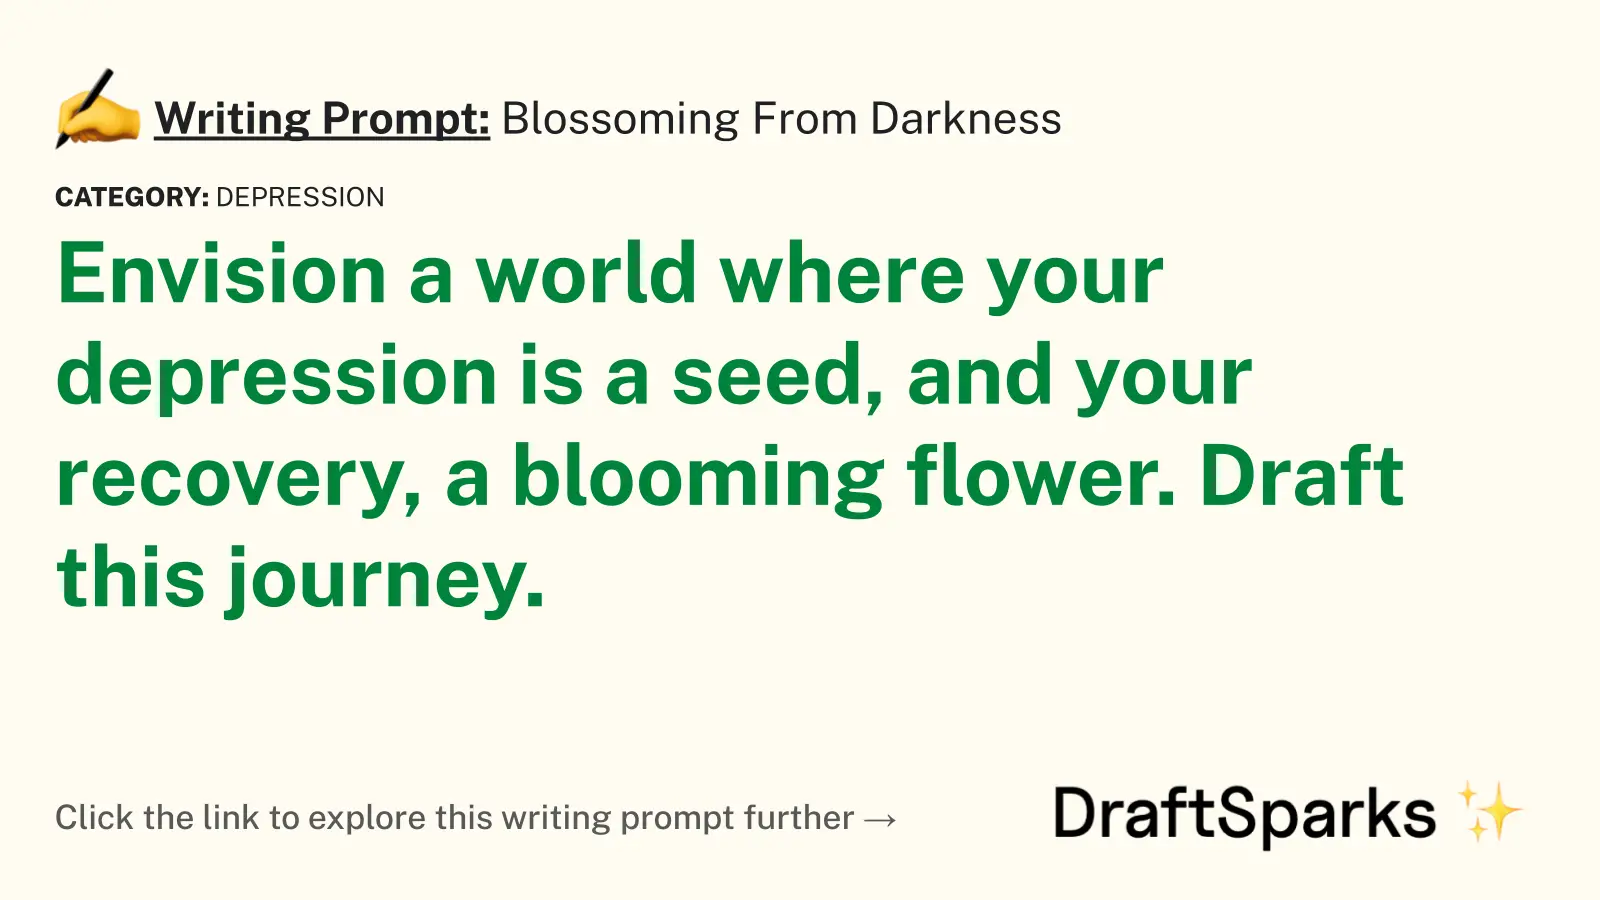 Blossoming From Darkness